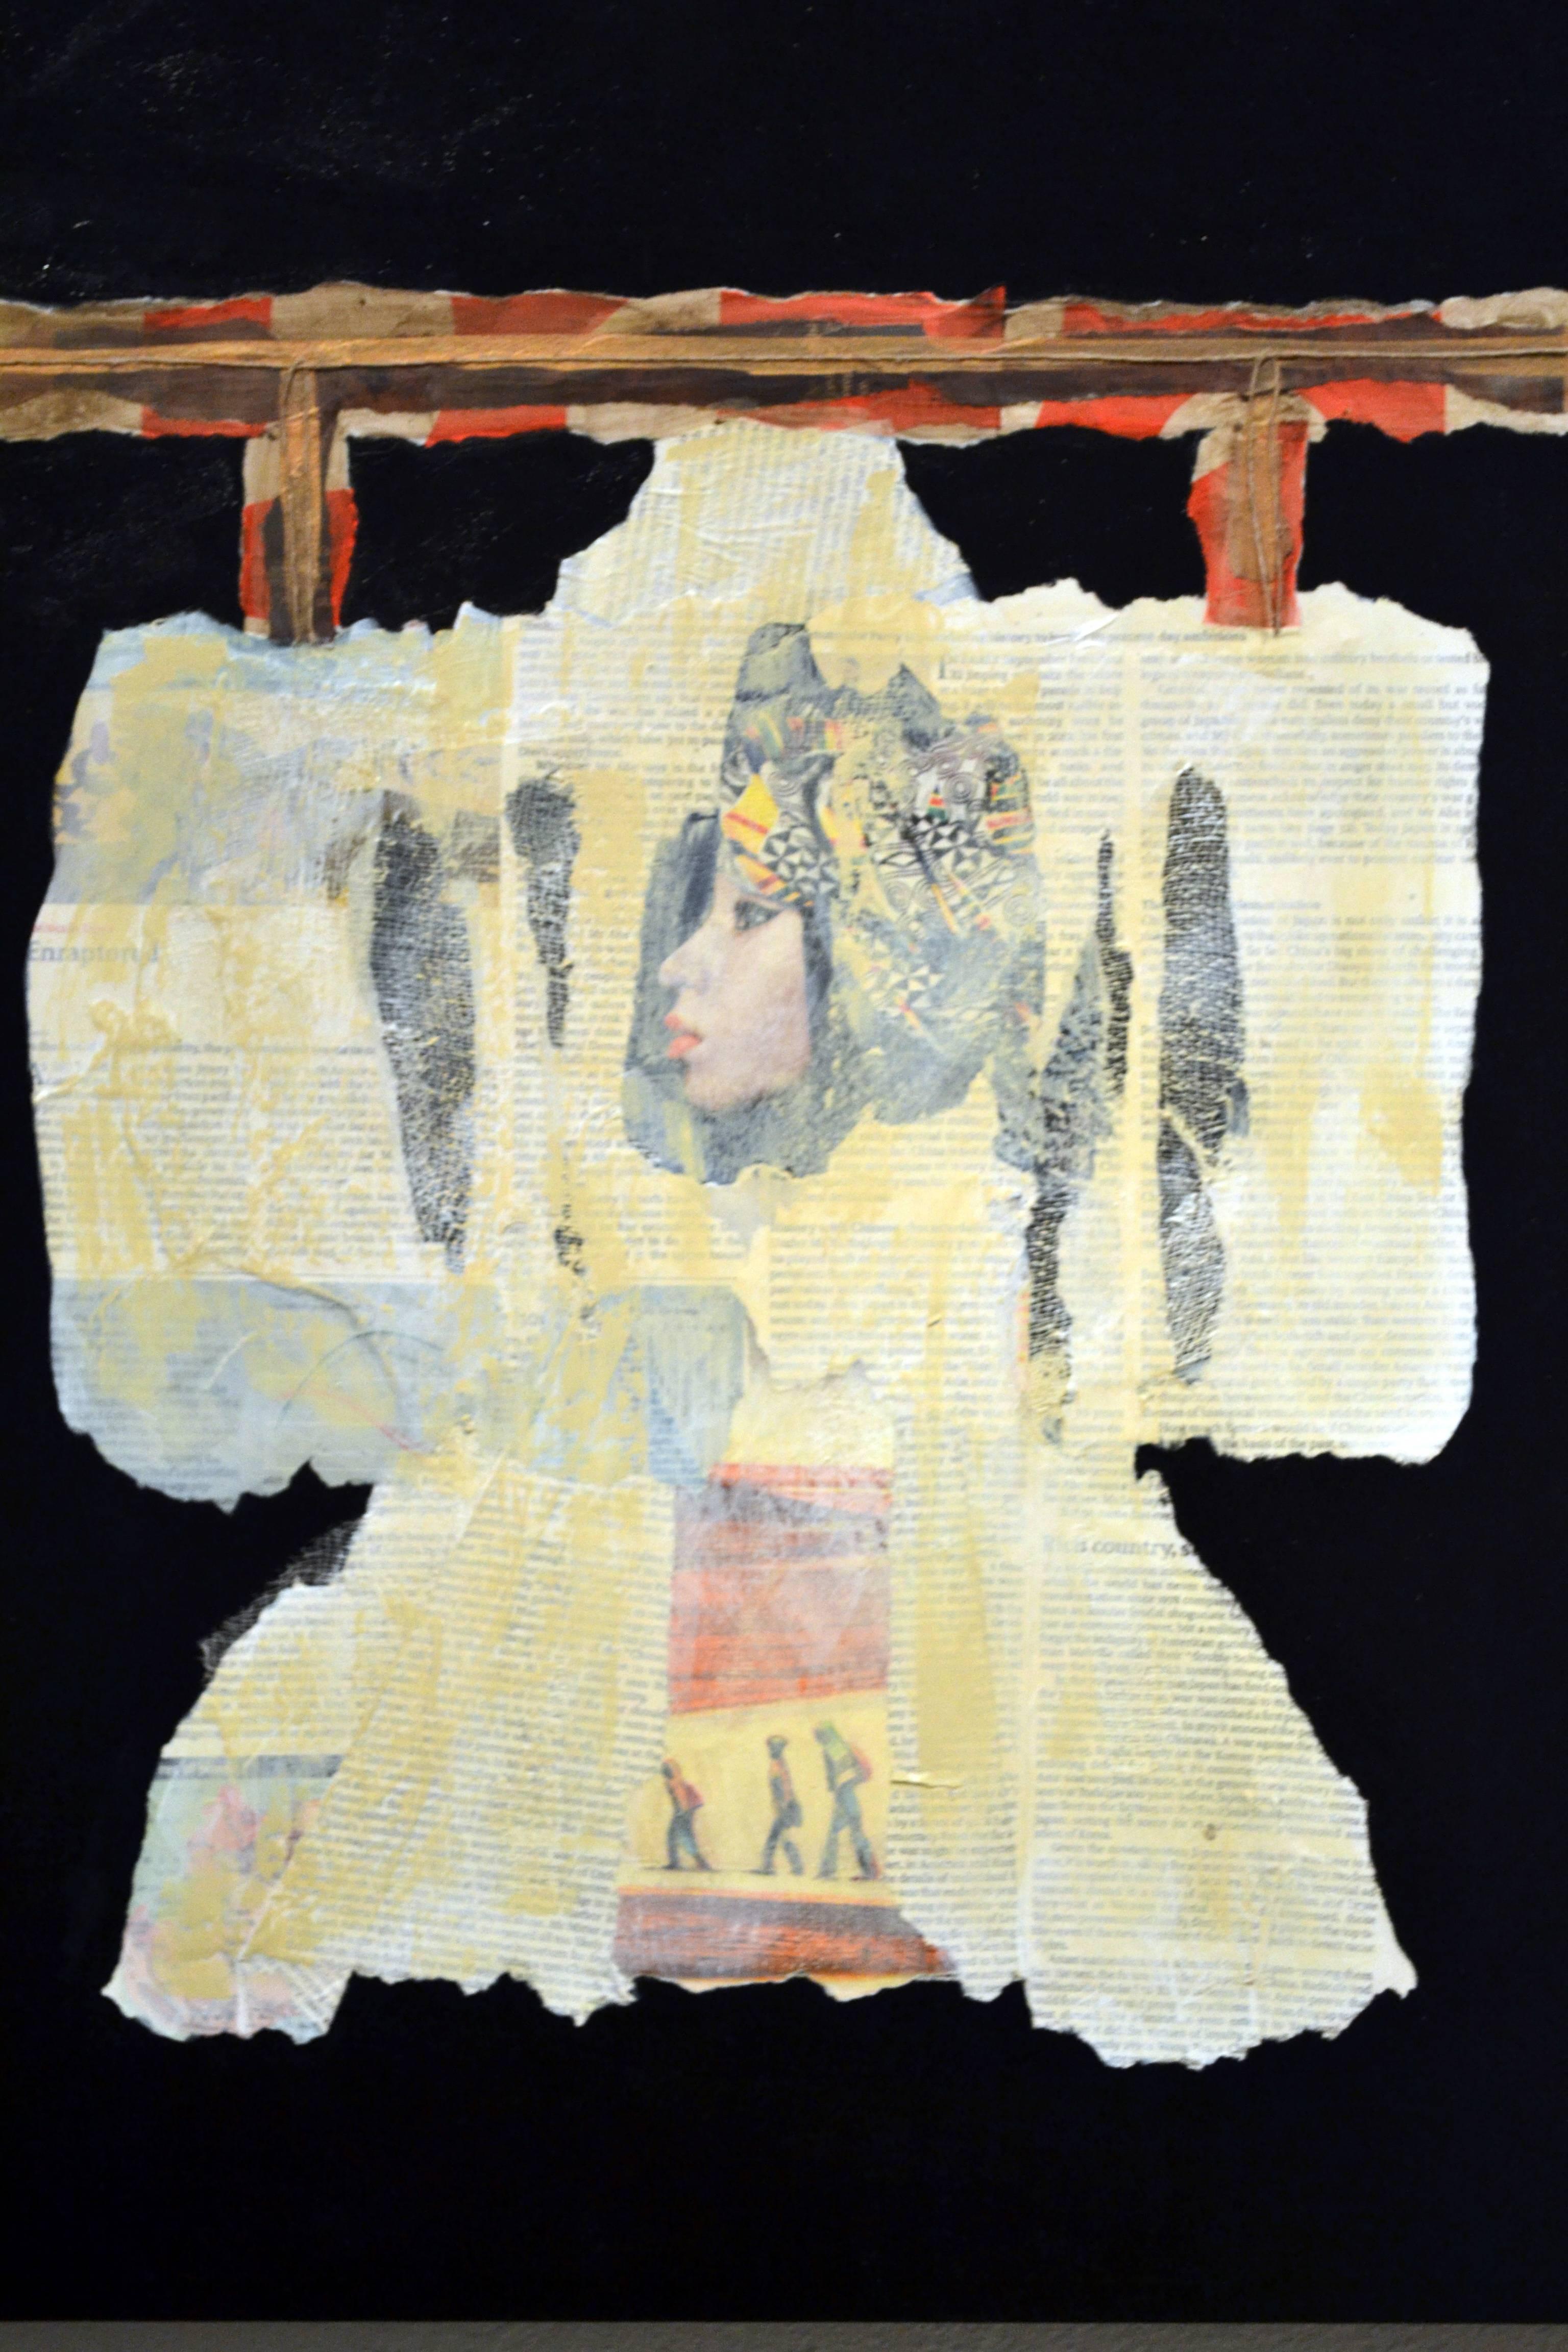 Artist Jane Evans is greatly inspired by natural forms and the deconstruction of organic and architectural elements. This abstract mixed-media collage on board titled Artist no 49 with African American model is one of six in a series painted on